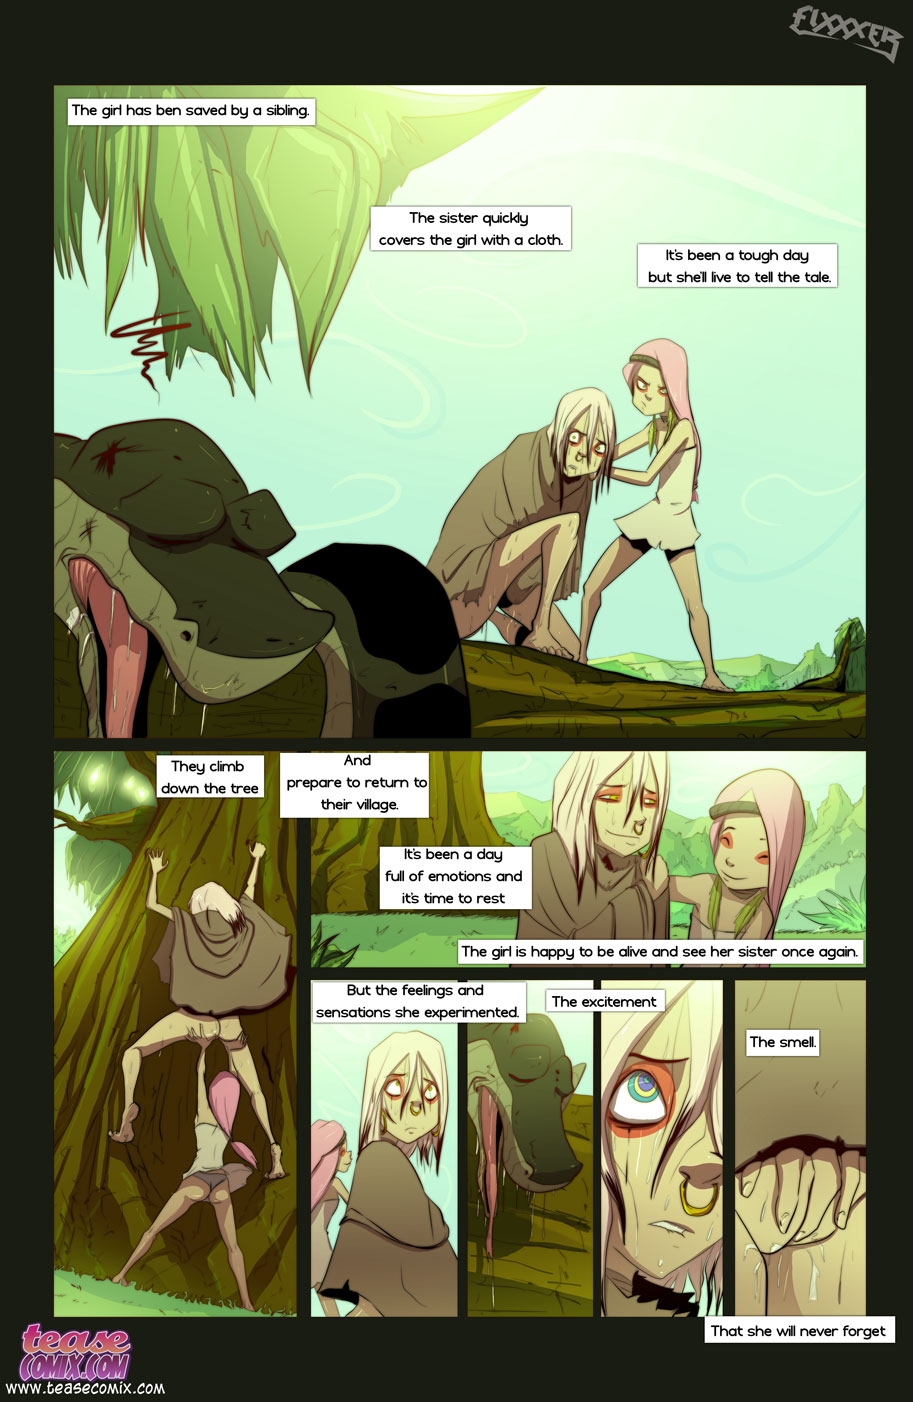 [TeaseComix (Fixxxer)] Of The Snake and The Girl #1 (The Jungle Book) 22